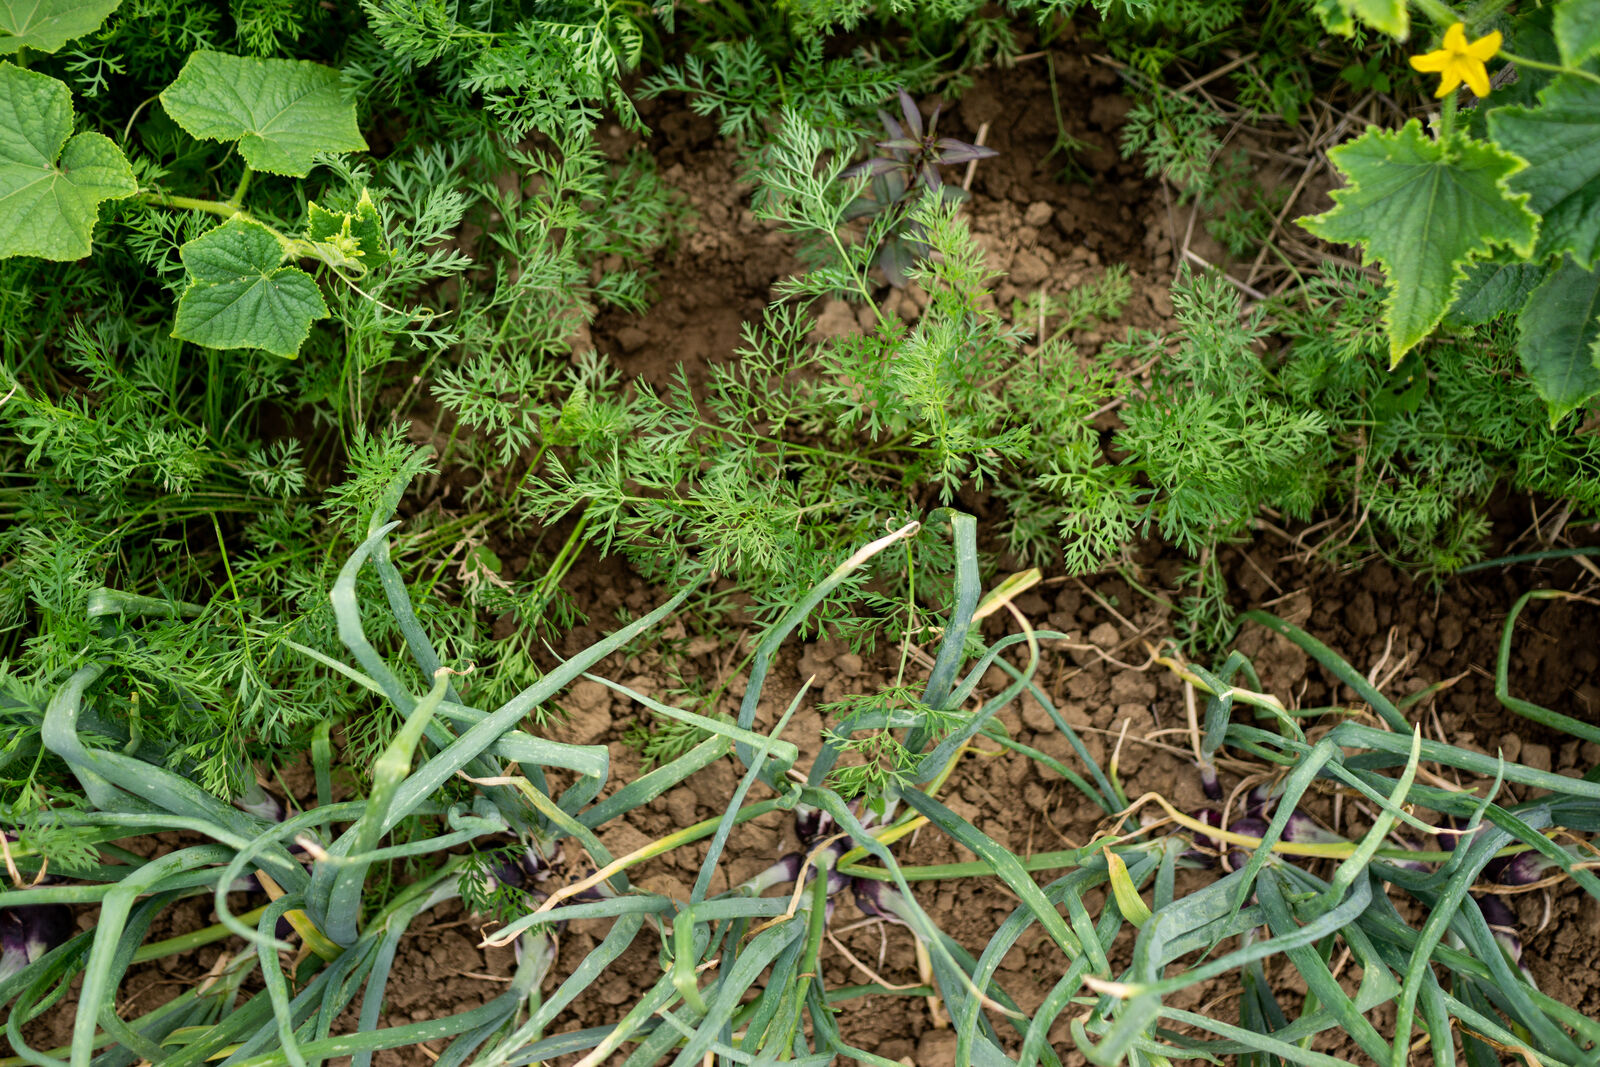 Mixed cultivation with cucumbers, onions and dill